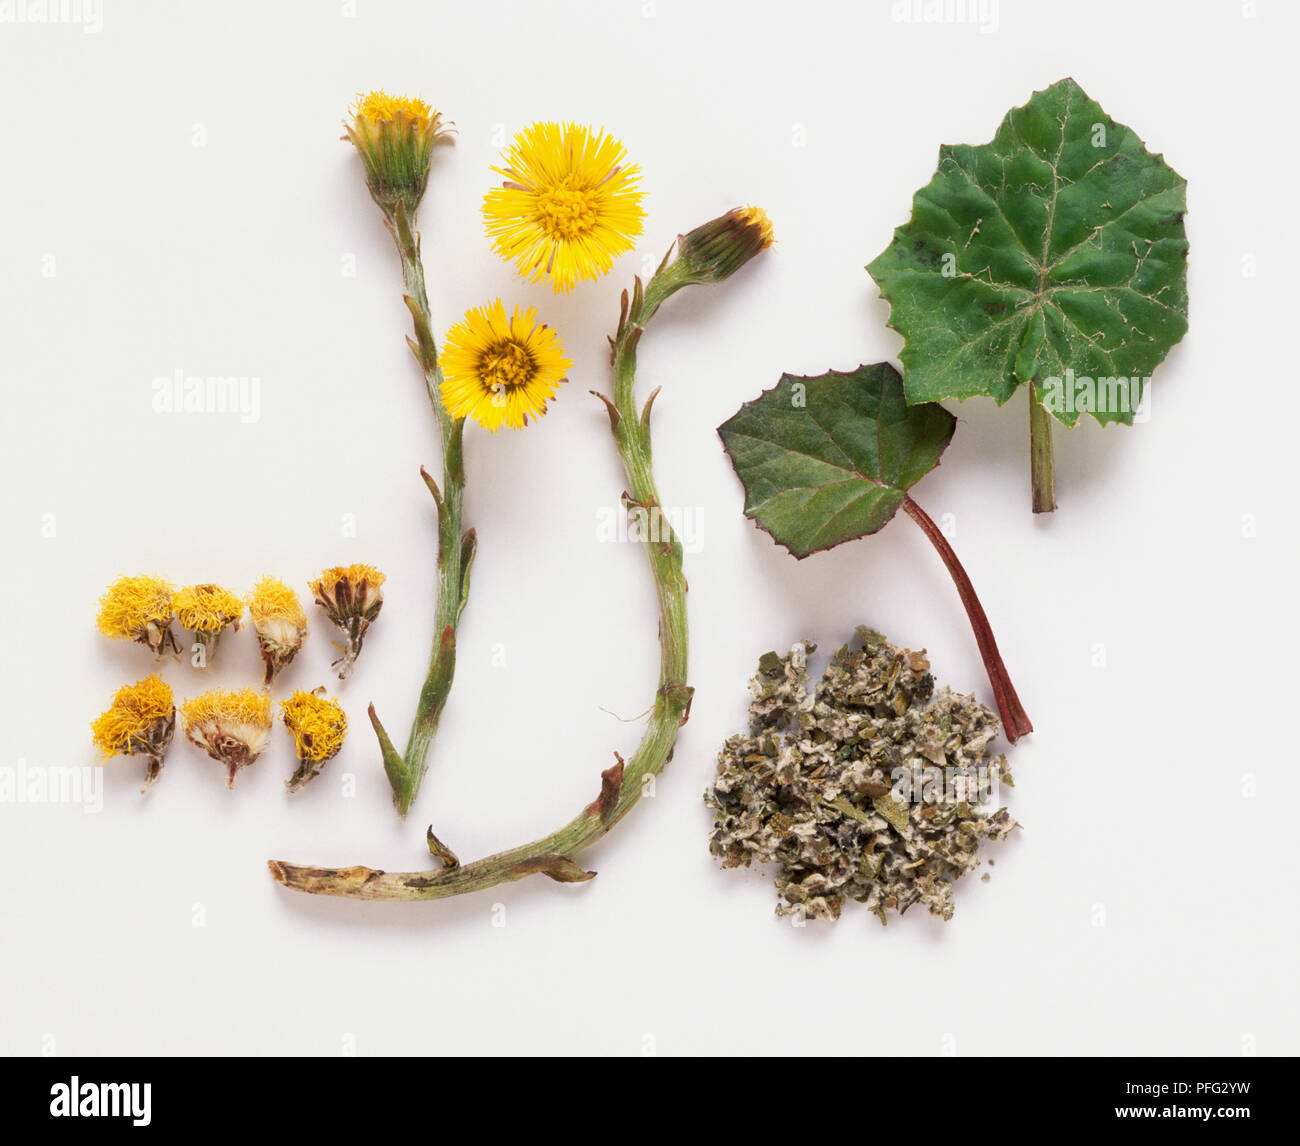 Tussilago farfara (Coltsfoot), fresh and dried flower heads and fresh and dried, ground leaves Stock Photo